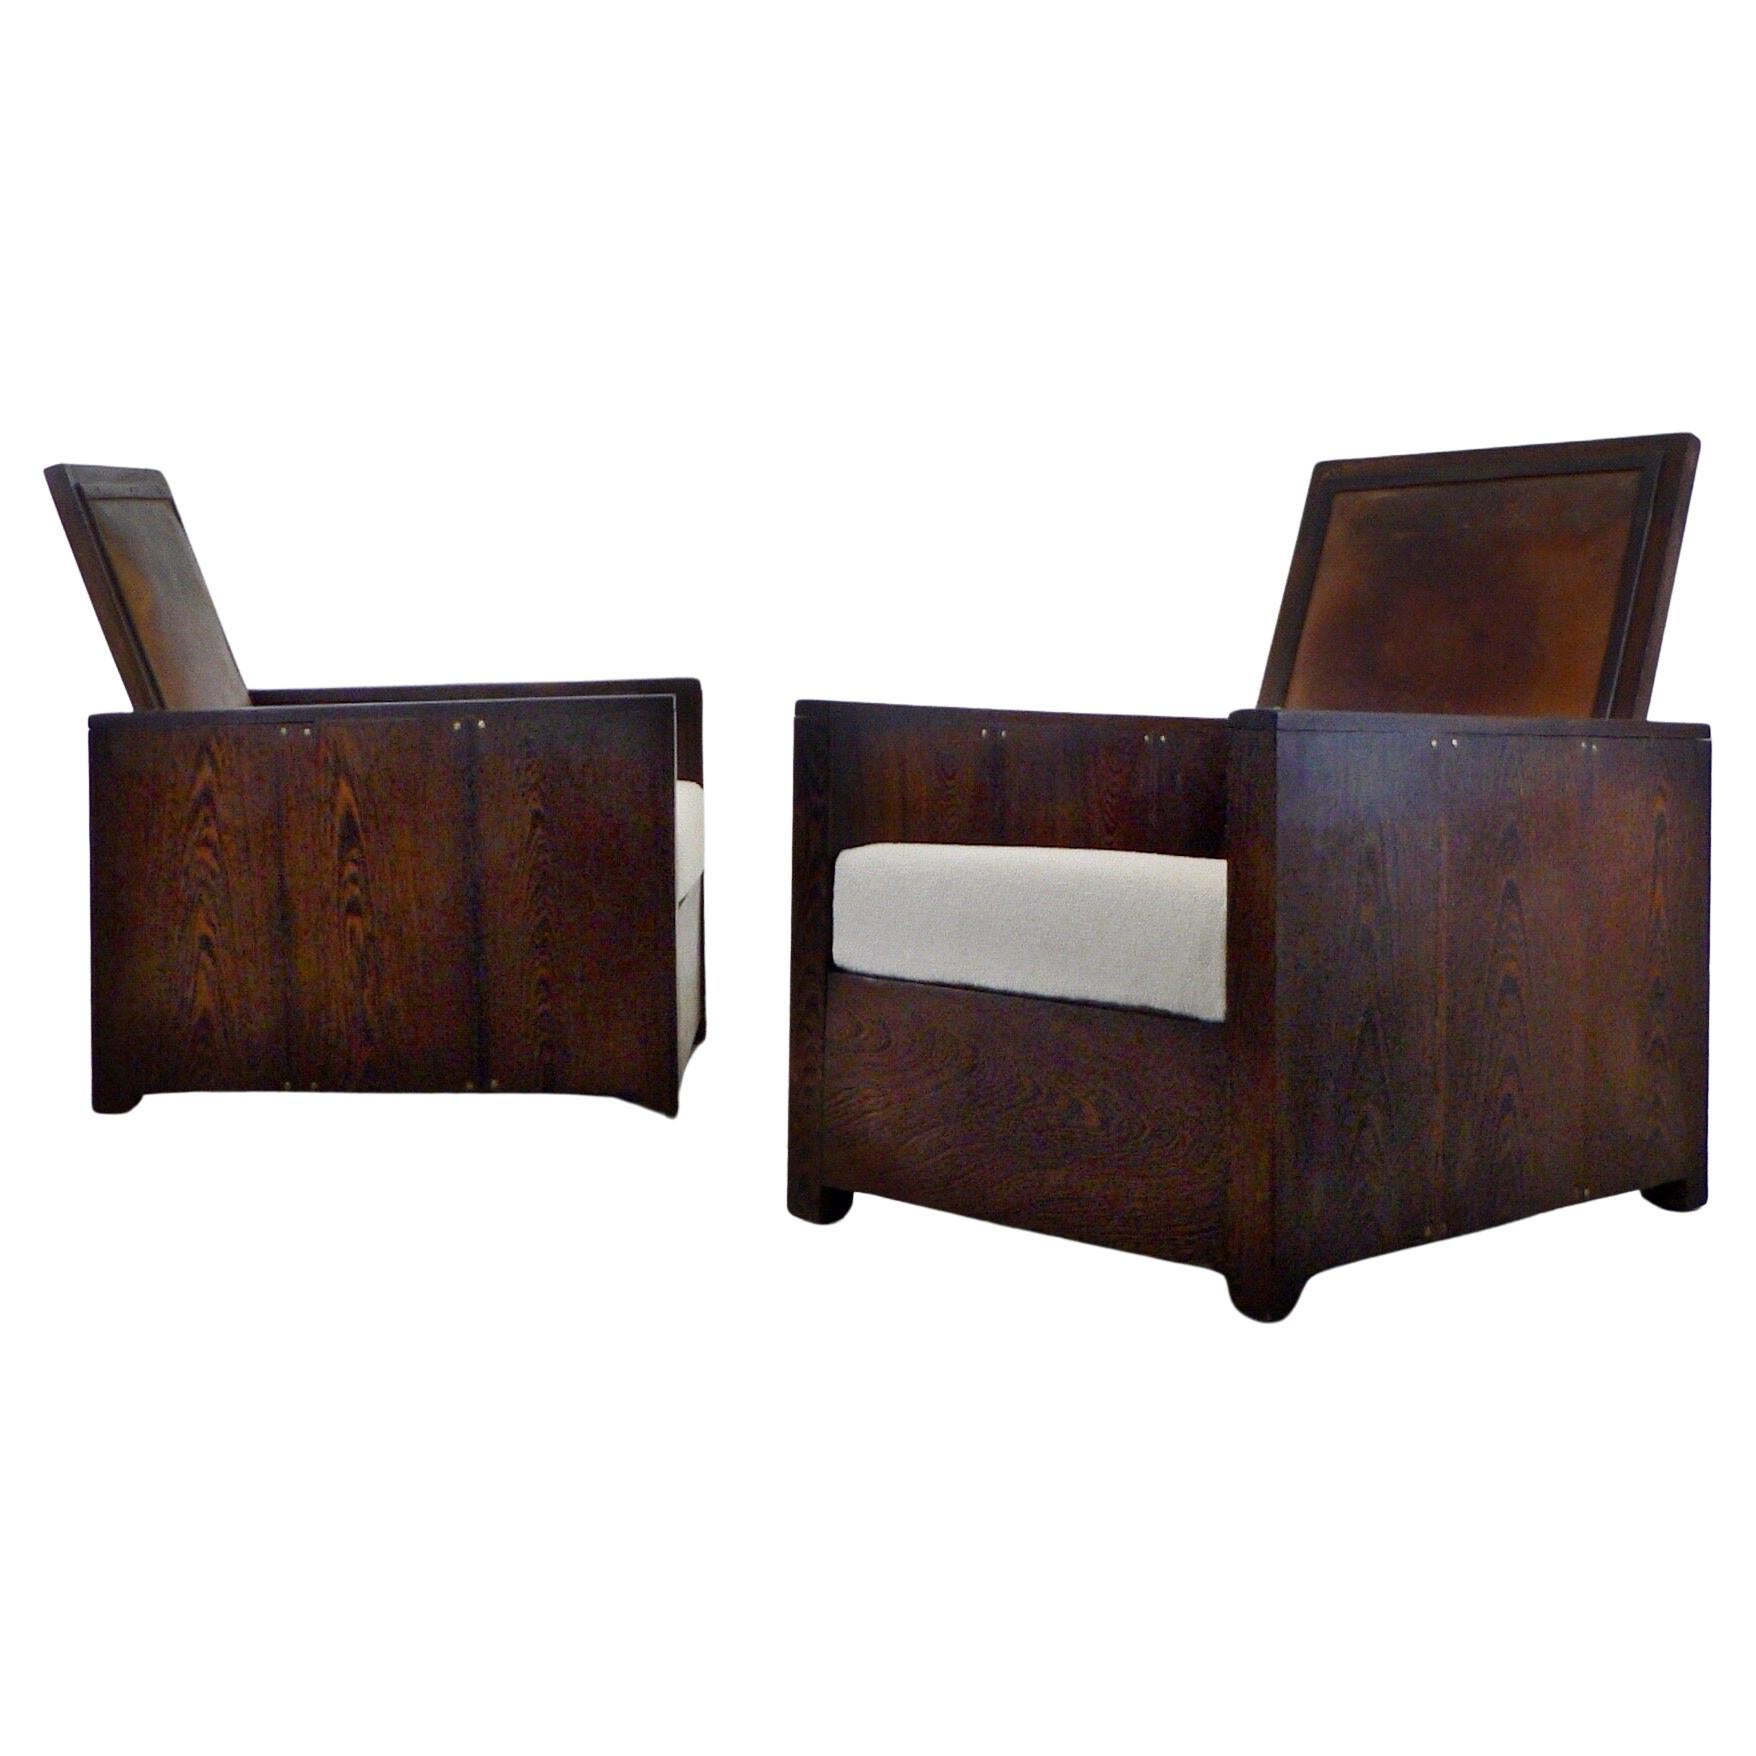 A rare and exquisite pair of French Modernist/Art Deco club lounge chairs, crafted by hand around the 1920s, stands out for their solid wenge wood construction. These chairs, potentially one of a kind, present a distinctive fusion of minimalist